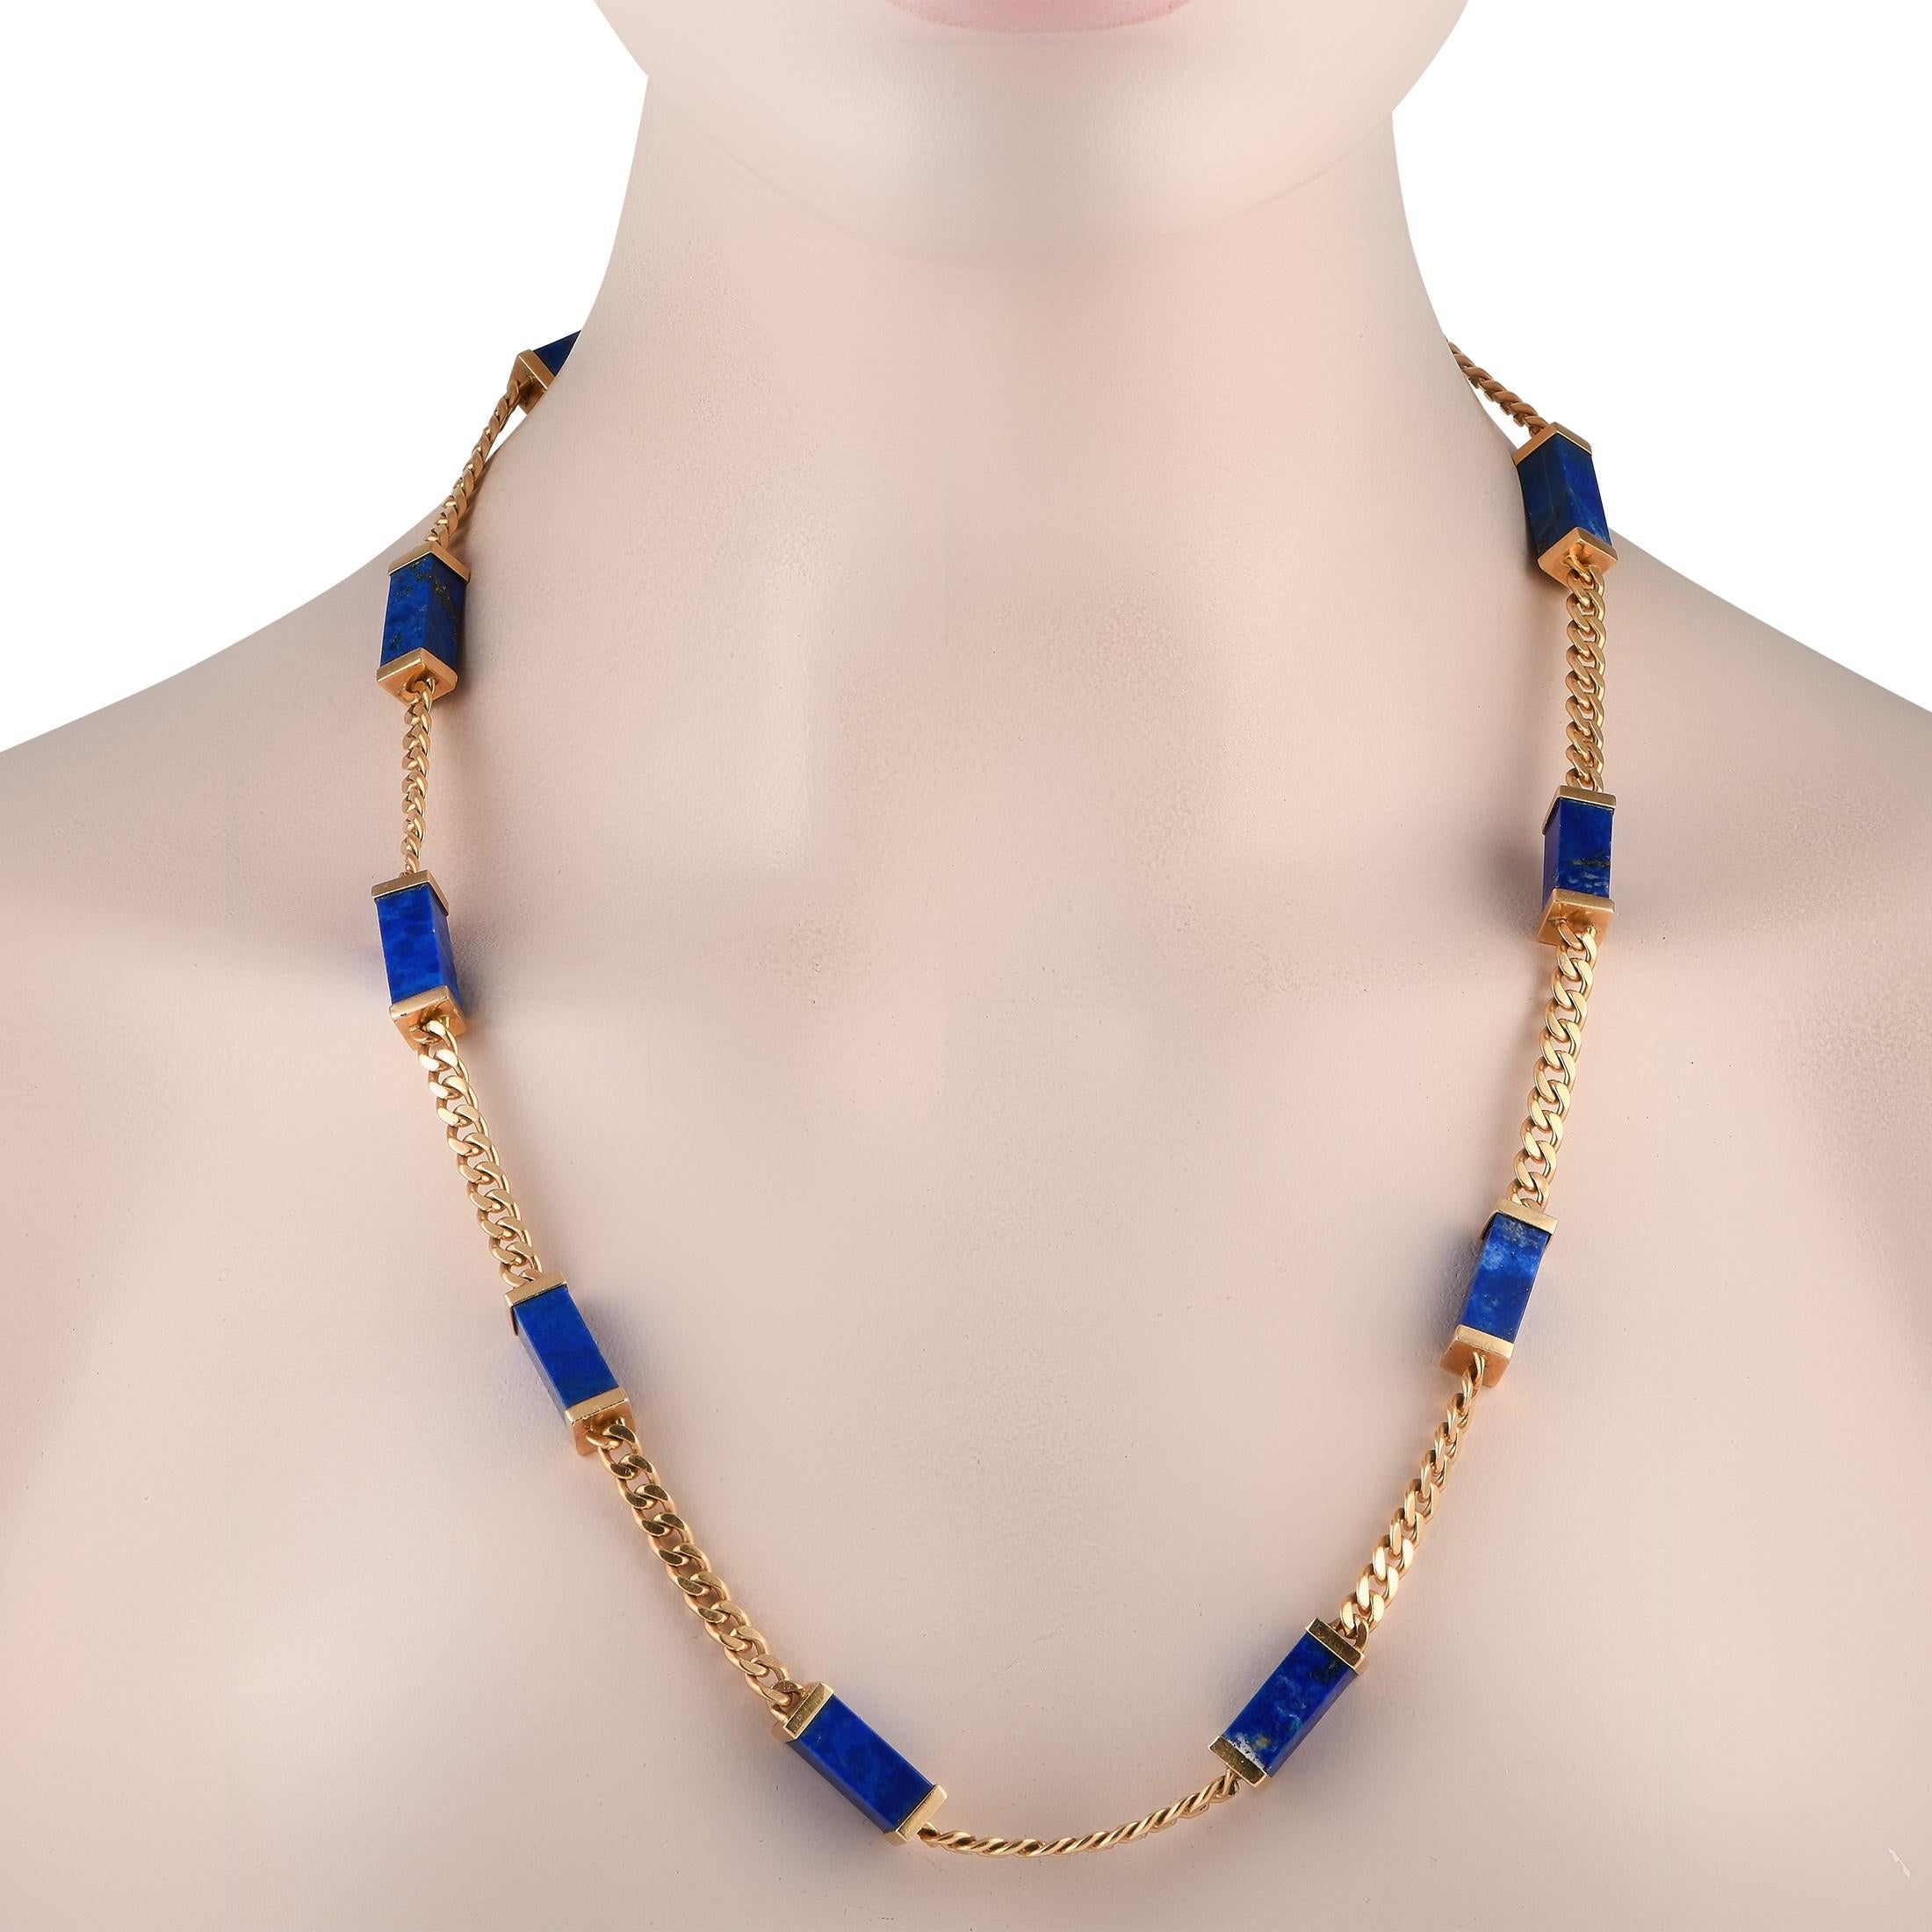 Captivating blue Lapis gemstones contrast beautifully against this vintage necklaces bold 14K Yellow Gold chain. Measuring 24 long, this luxury piece is undeniably elegant and effortlessly add a pop of color to any outfit or occasion.This jewelry